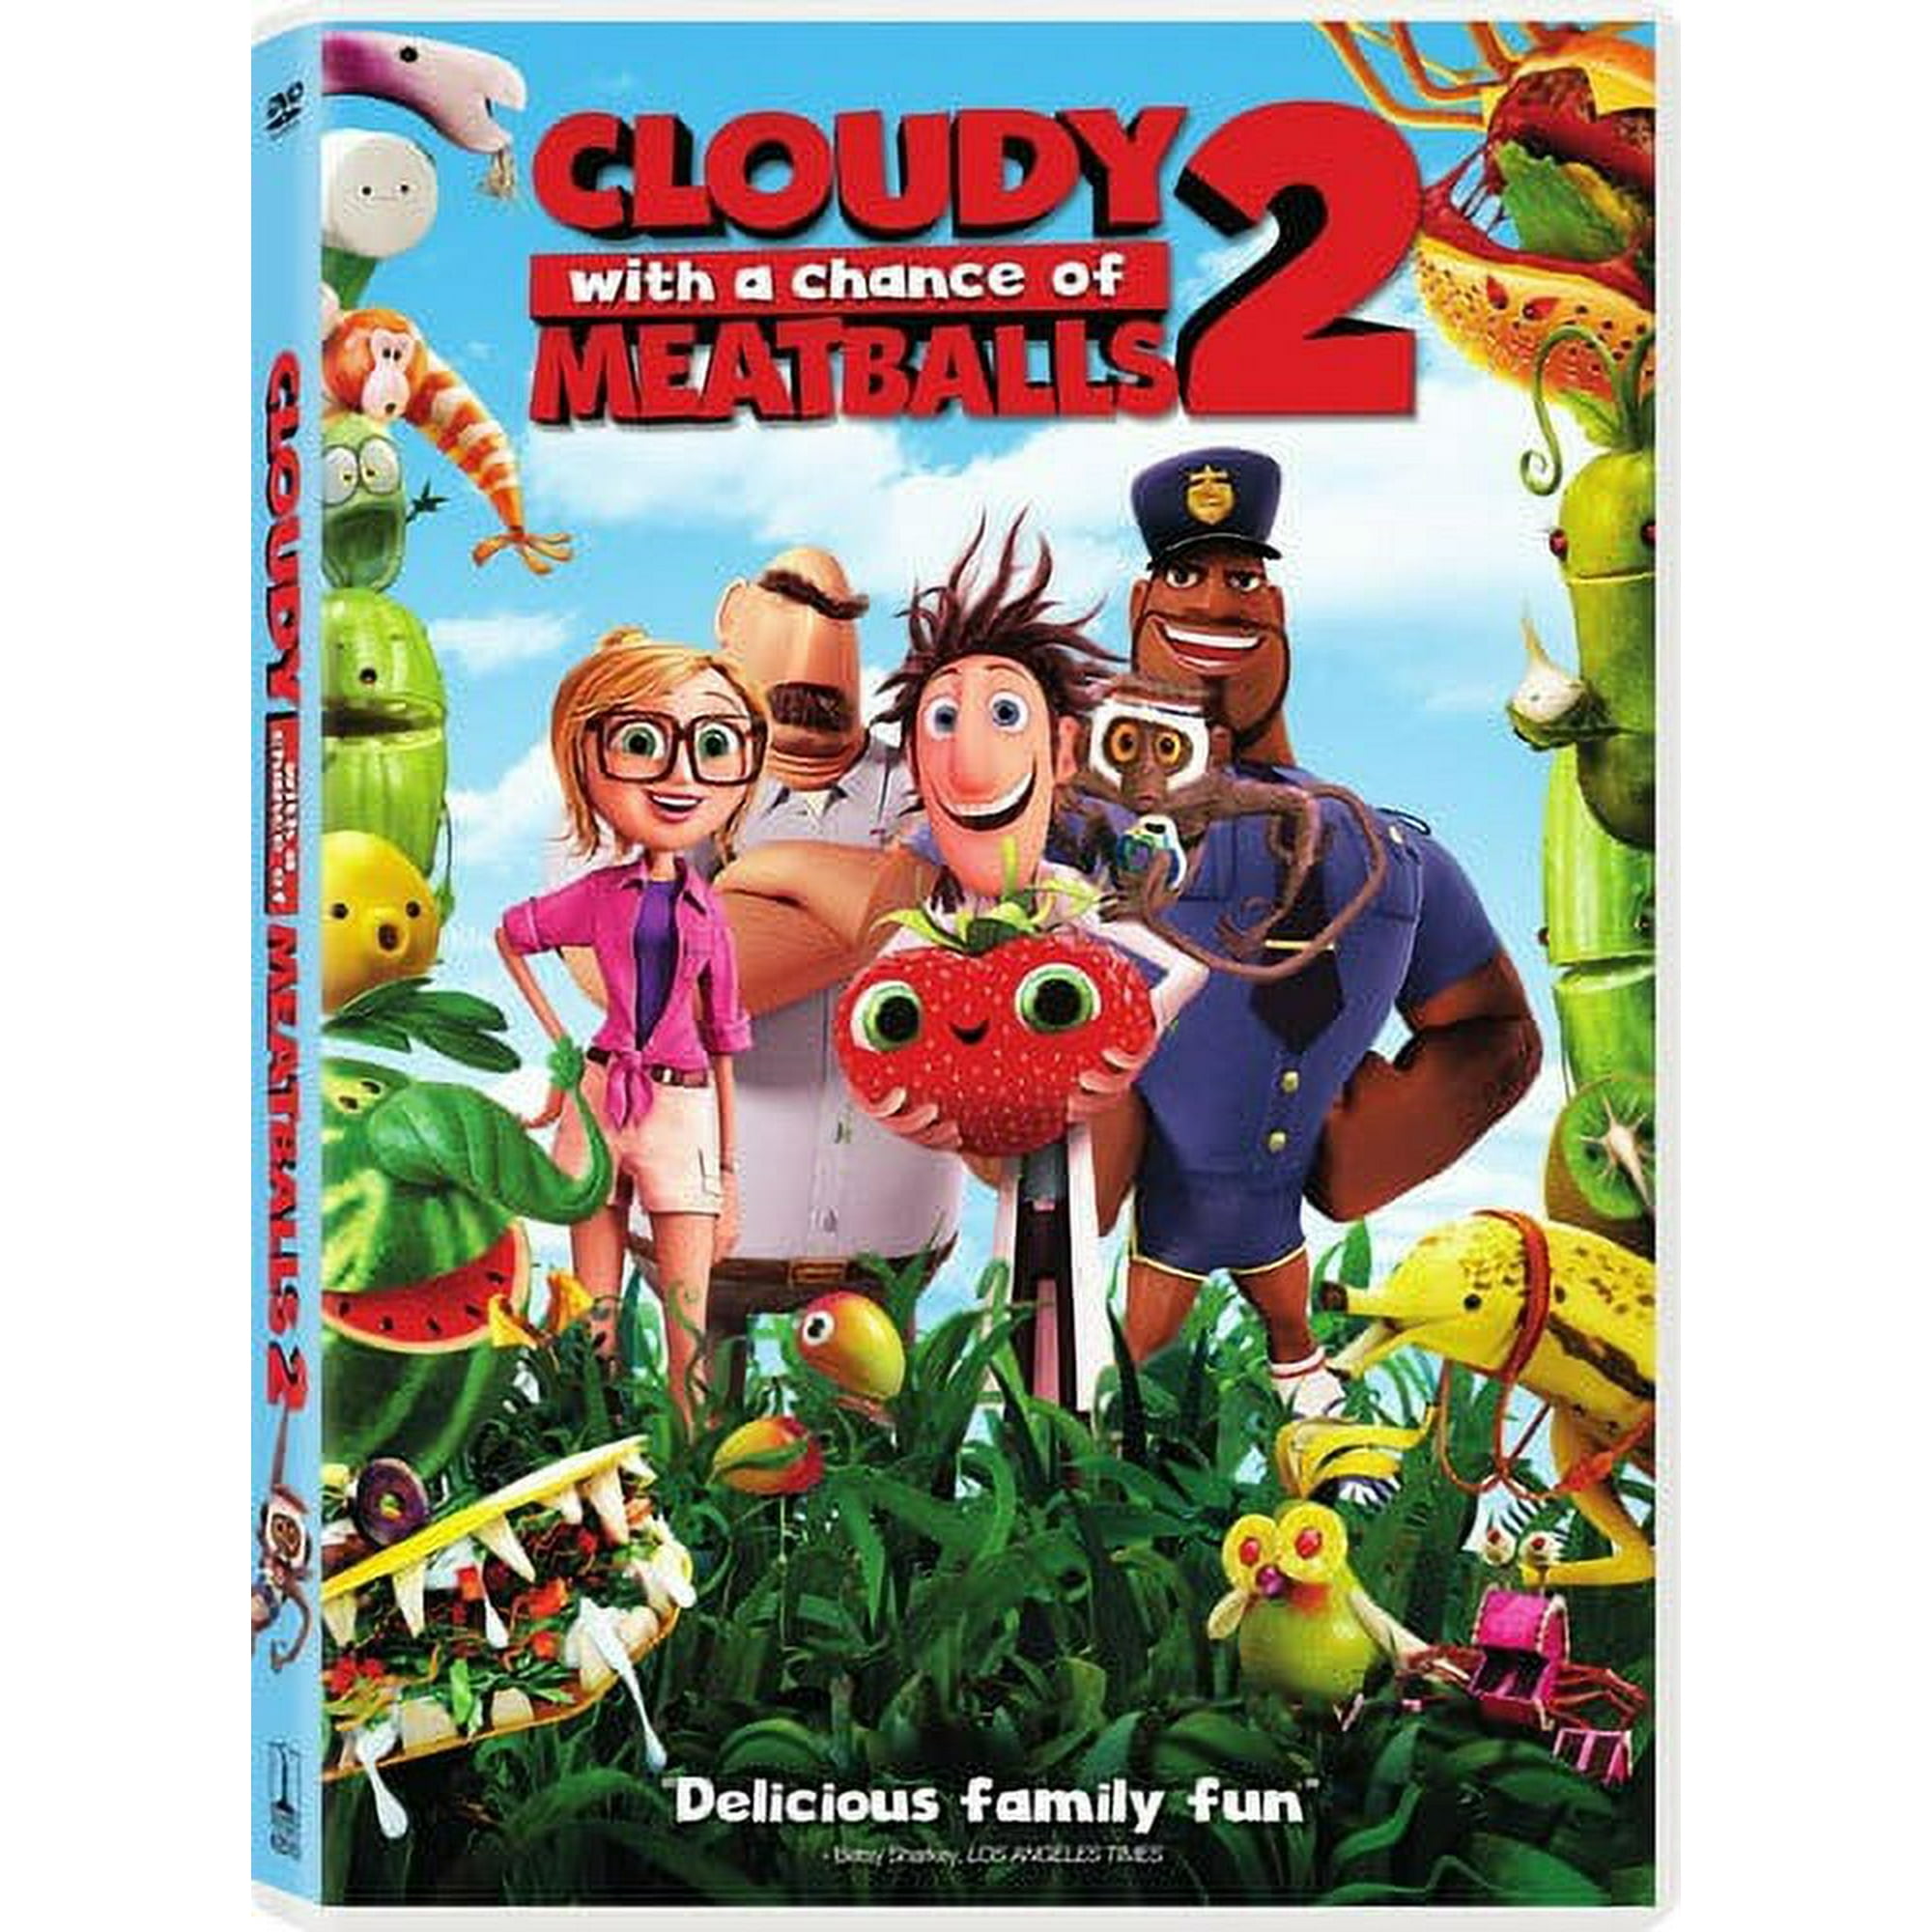 cloudy with a chance of meatballs 2 characters